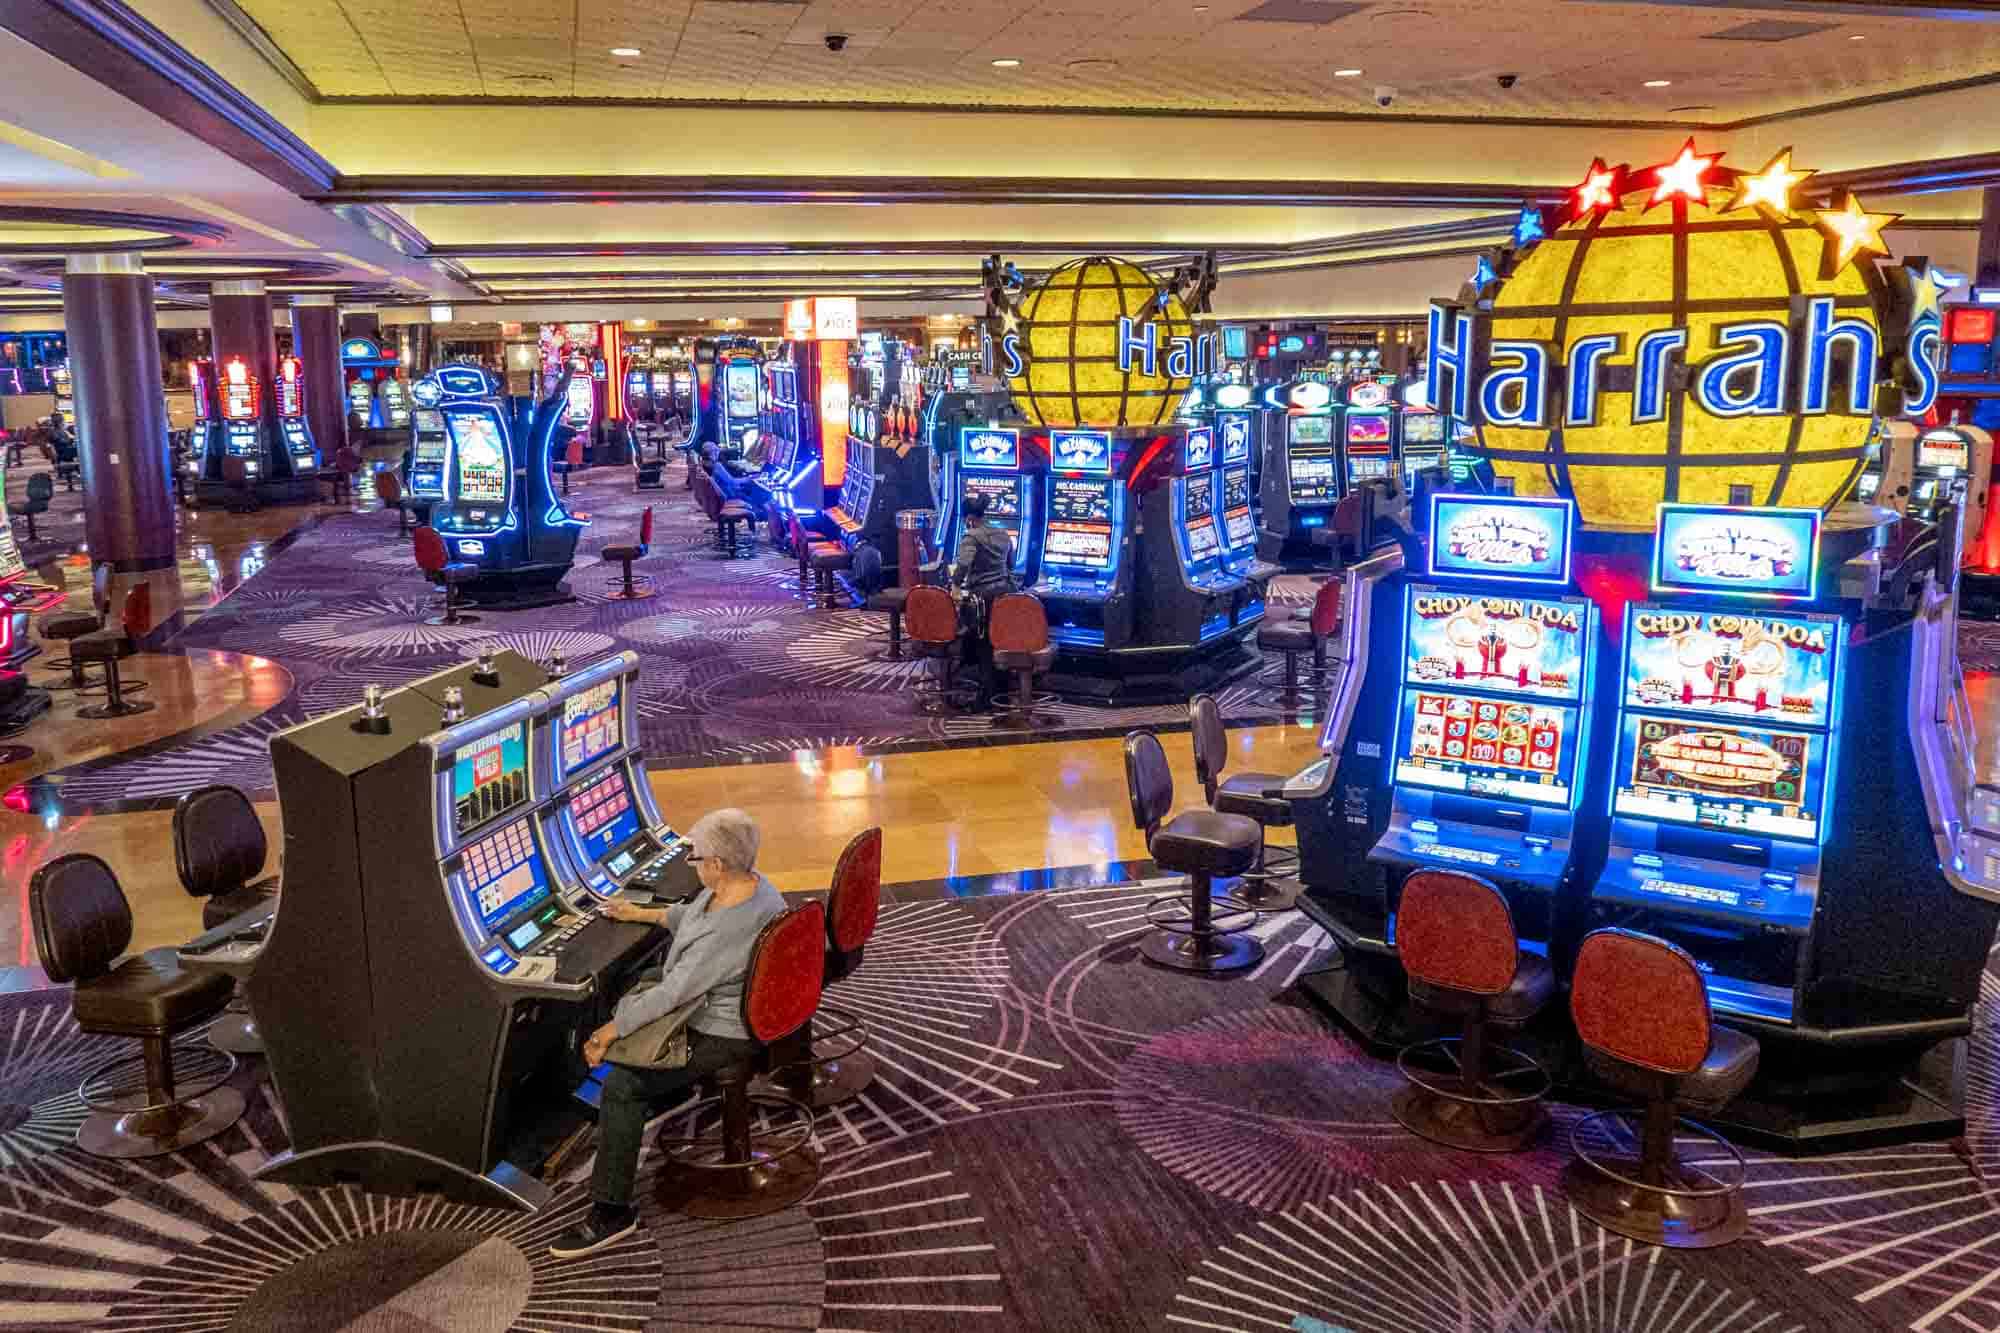 Casino filled with slot machines topped with globes labeled "Harrahs"